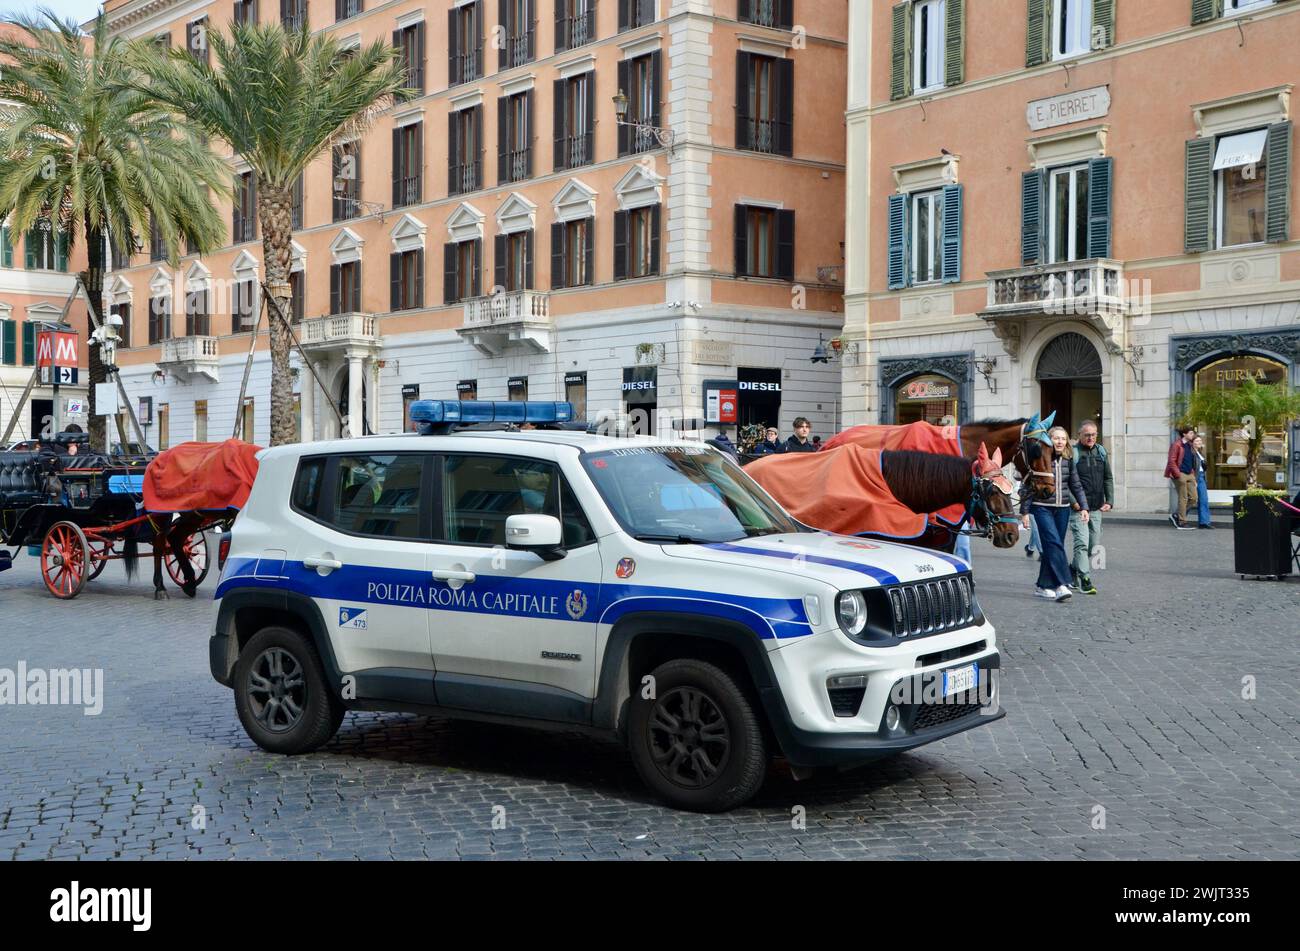 police jeep and horse drawn carriages in the spanish plaza of rome capital of italy EU Stock Photo